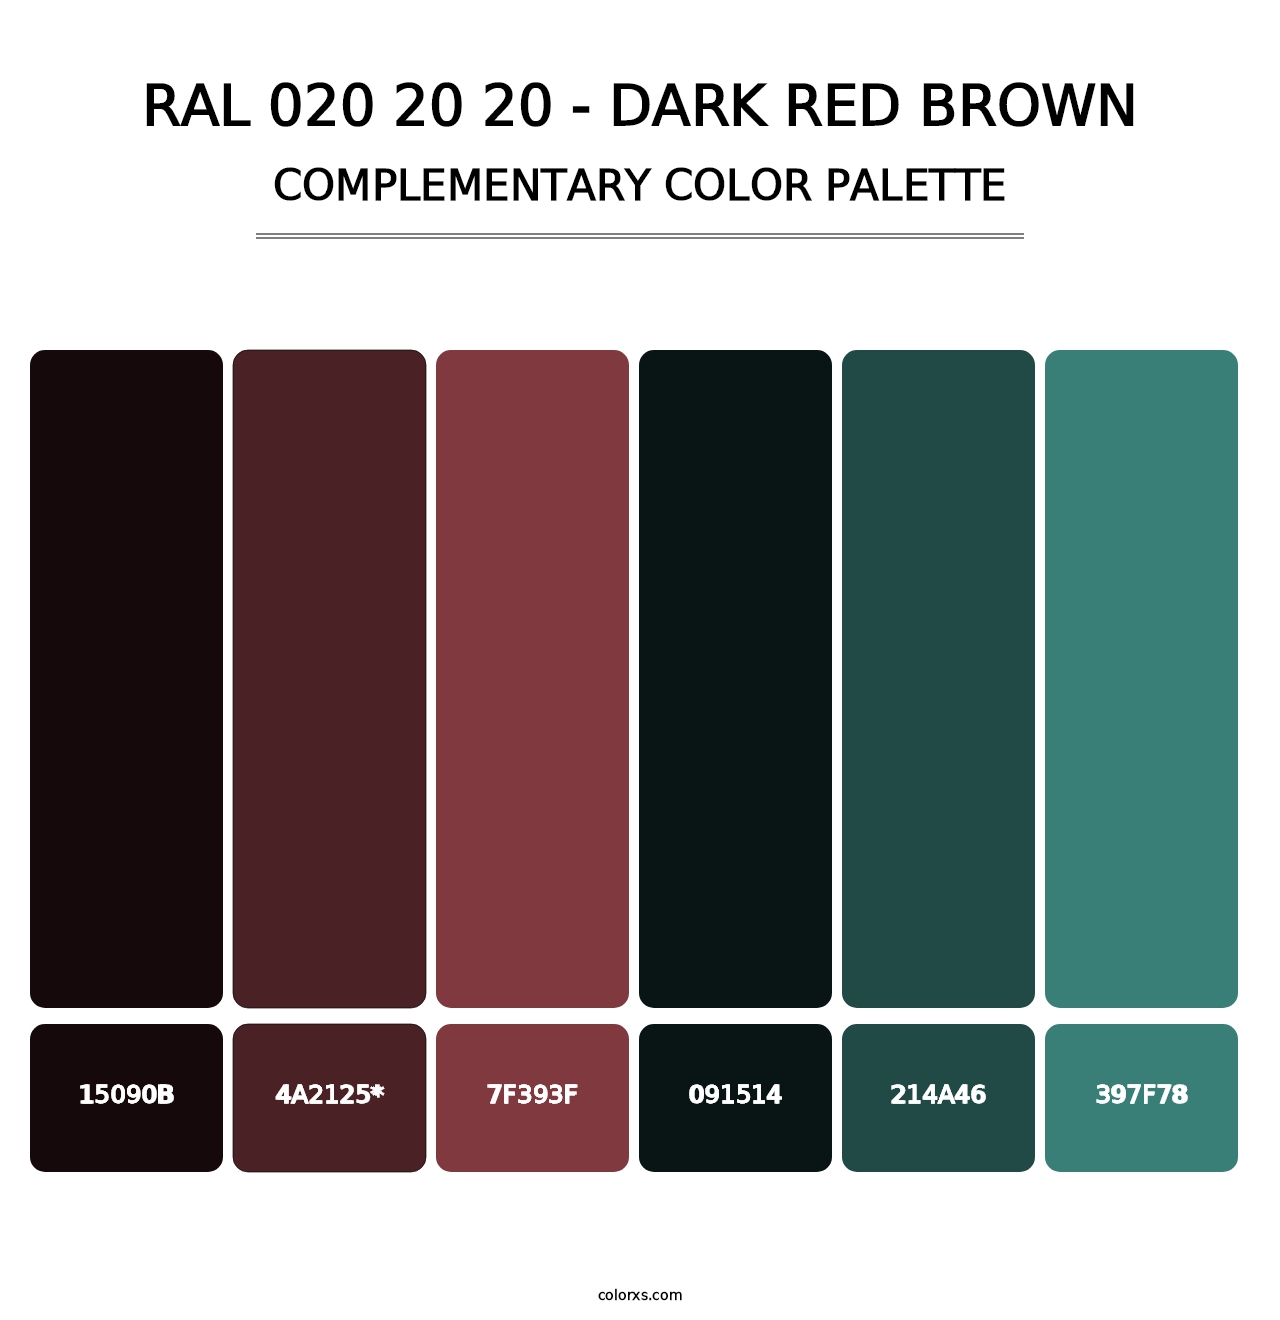 RAL 020 20 20 - Dark Red Brown - Complementary Color Palette